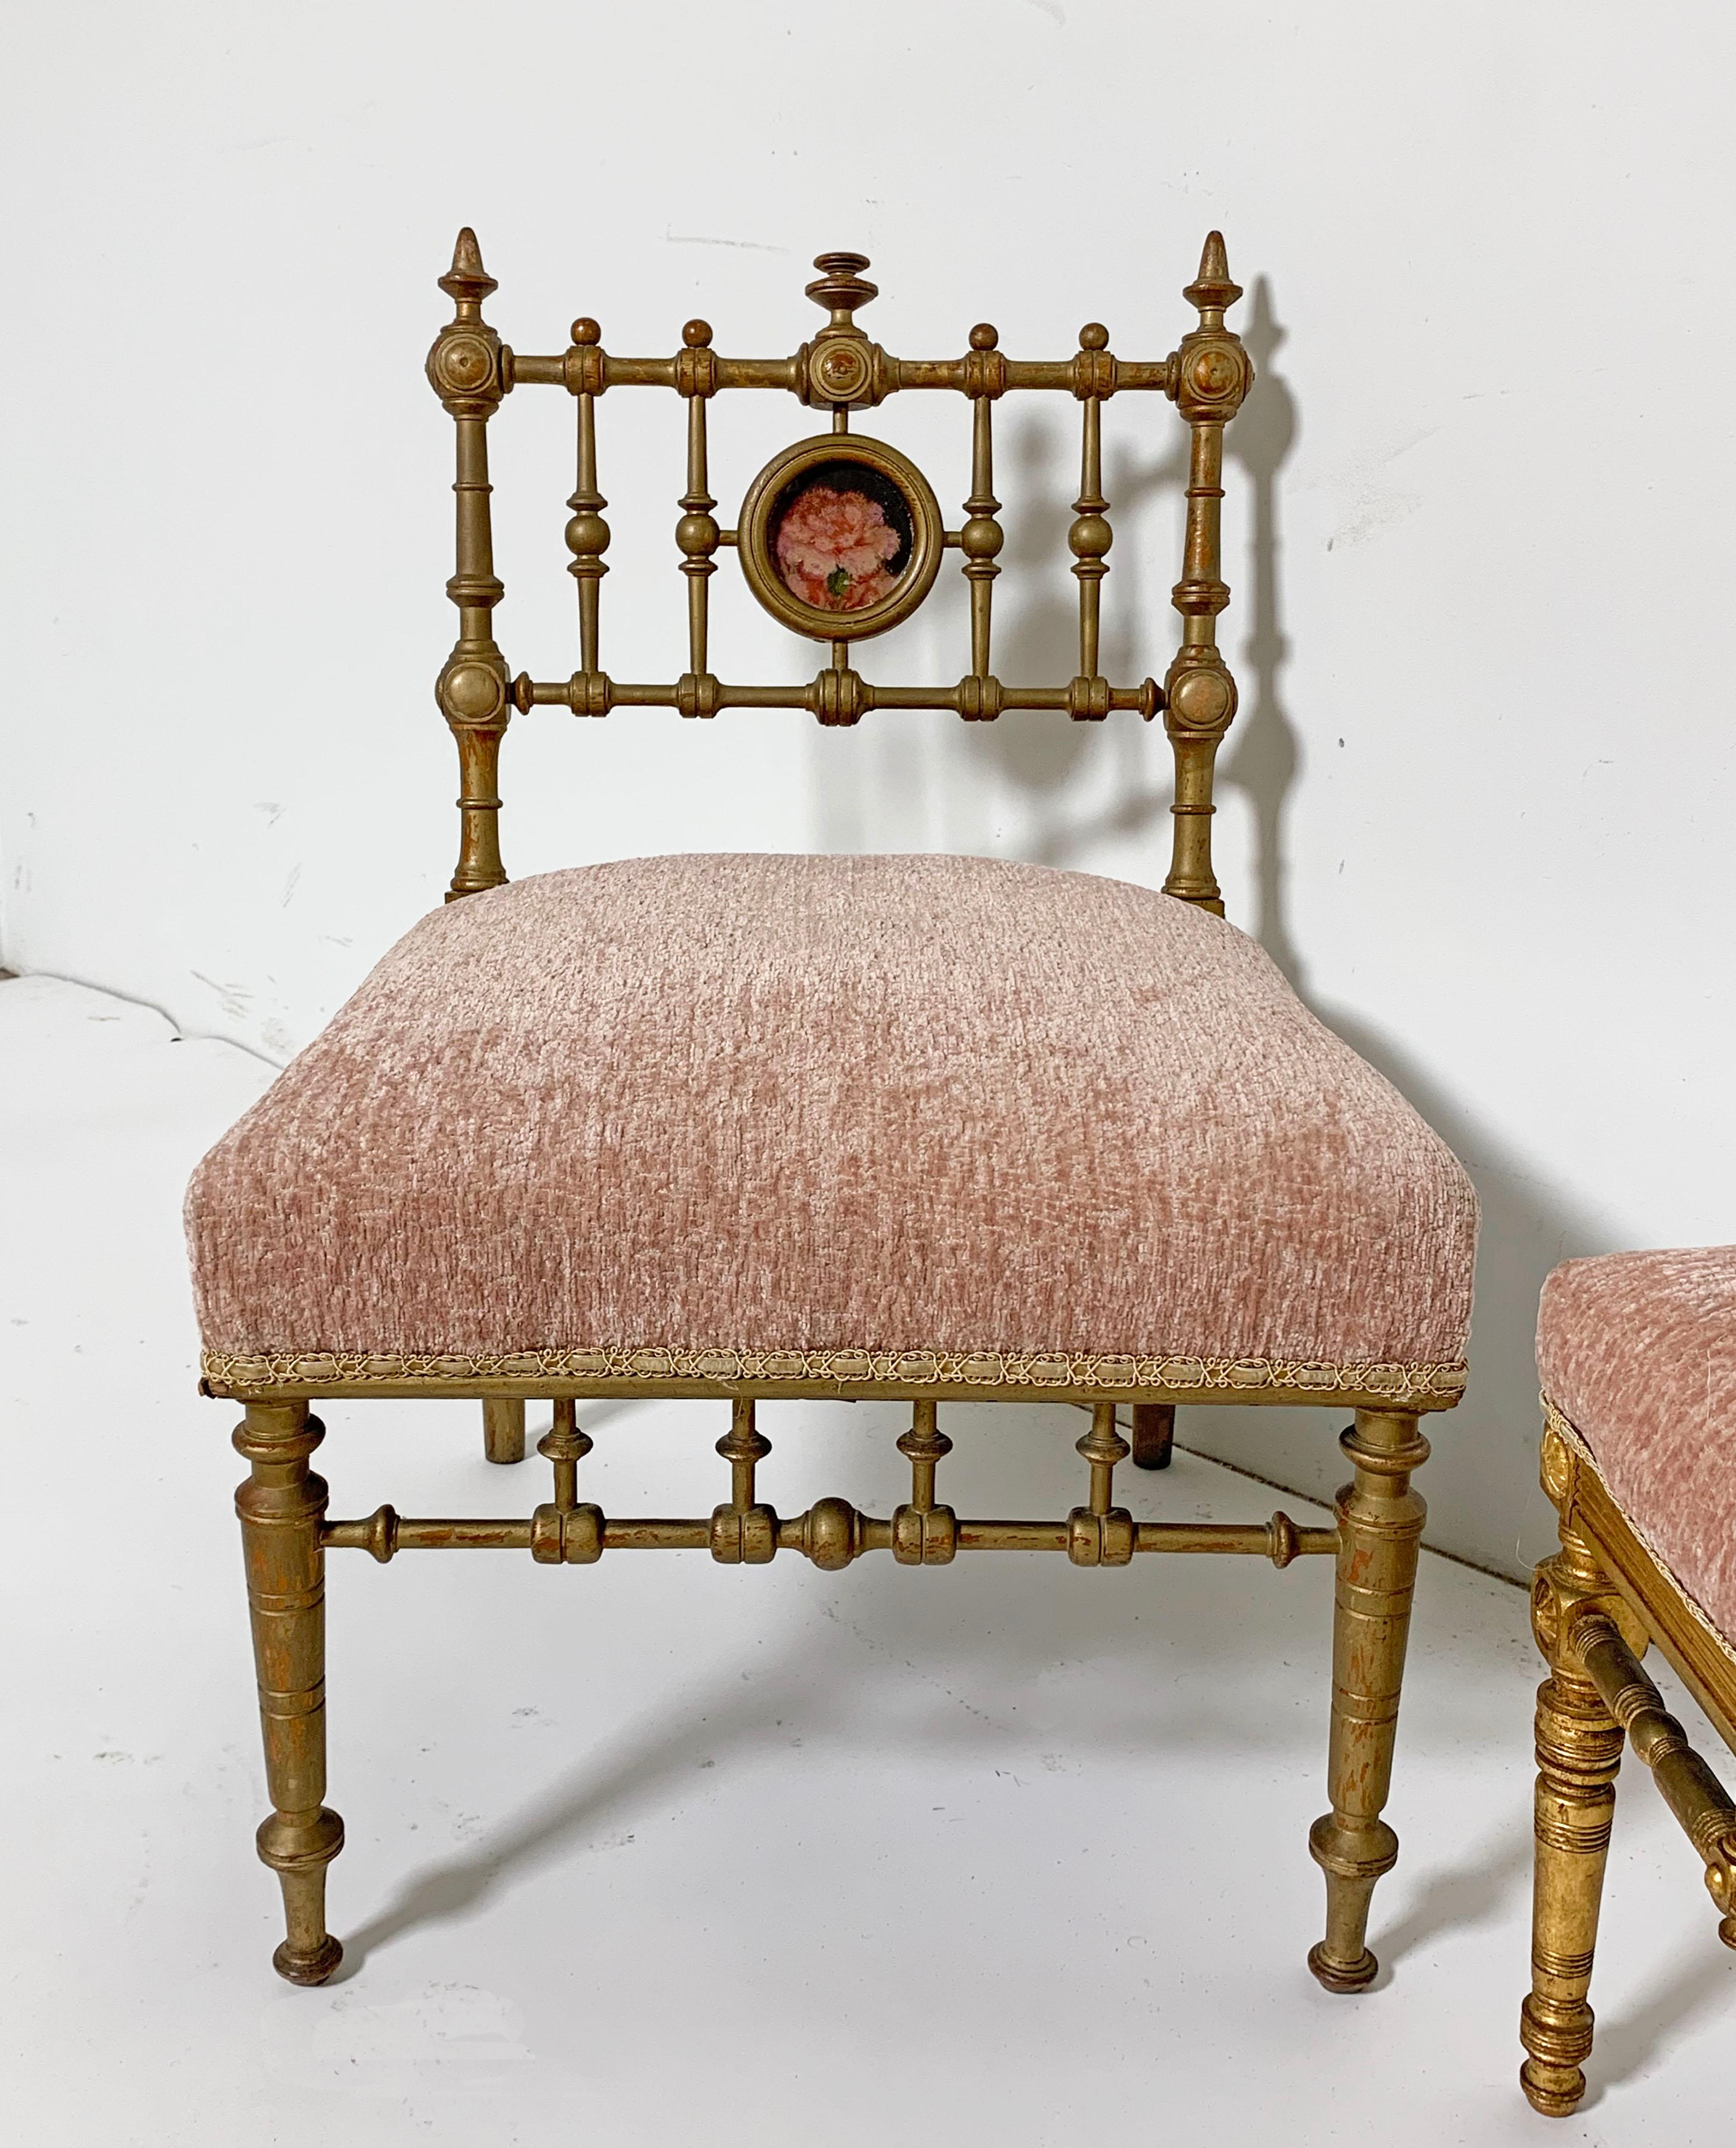 Upholstery Two American Aesthetic Movement Giltwood Slipper Chairs, circa Late 1800s